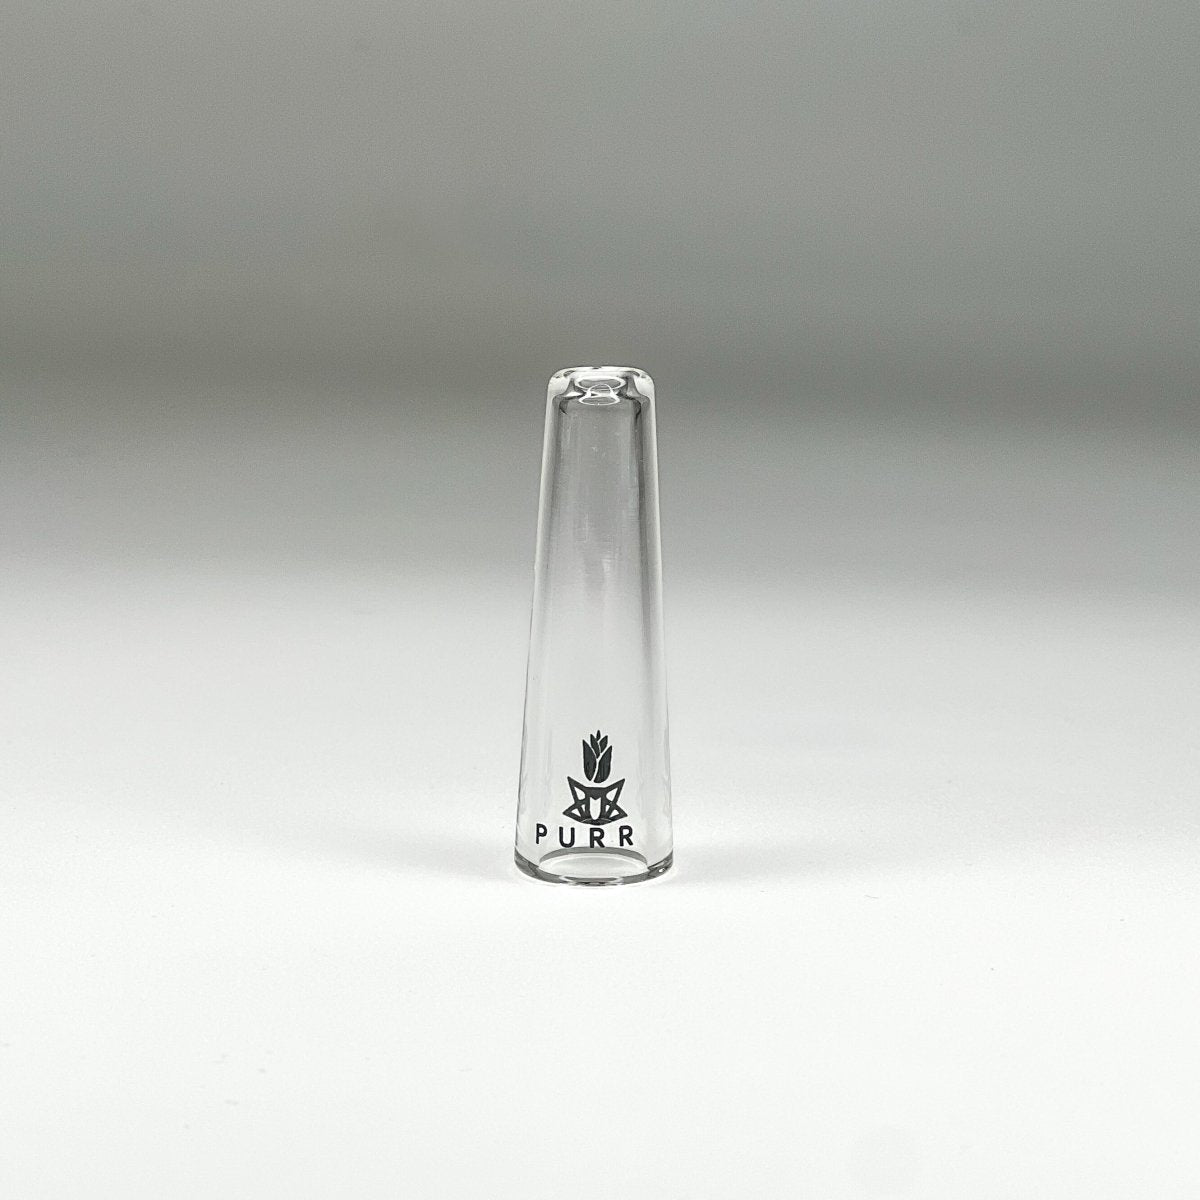 GLASS TIP - Fits Personal 2-4g